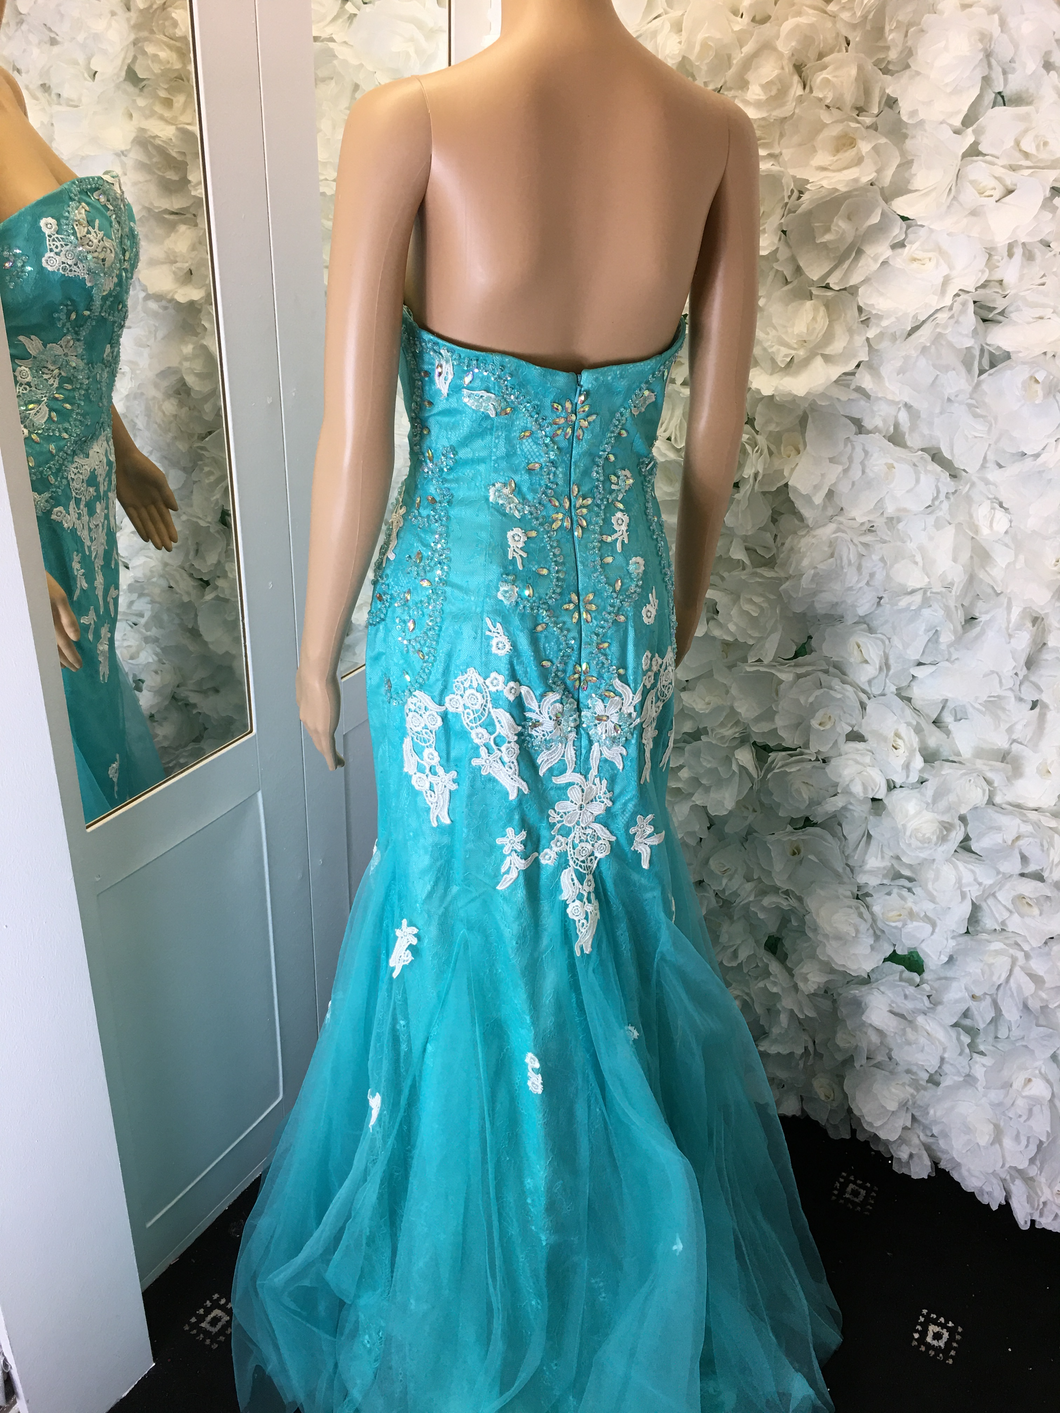 Aqua Embellished Fishtail Tulle & Lace detail Sweetheart Prom Formal Dress